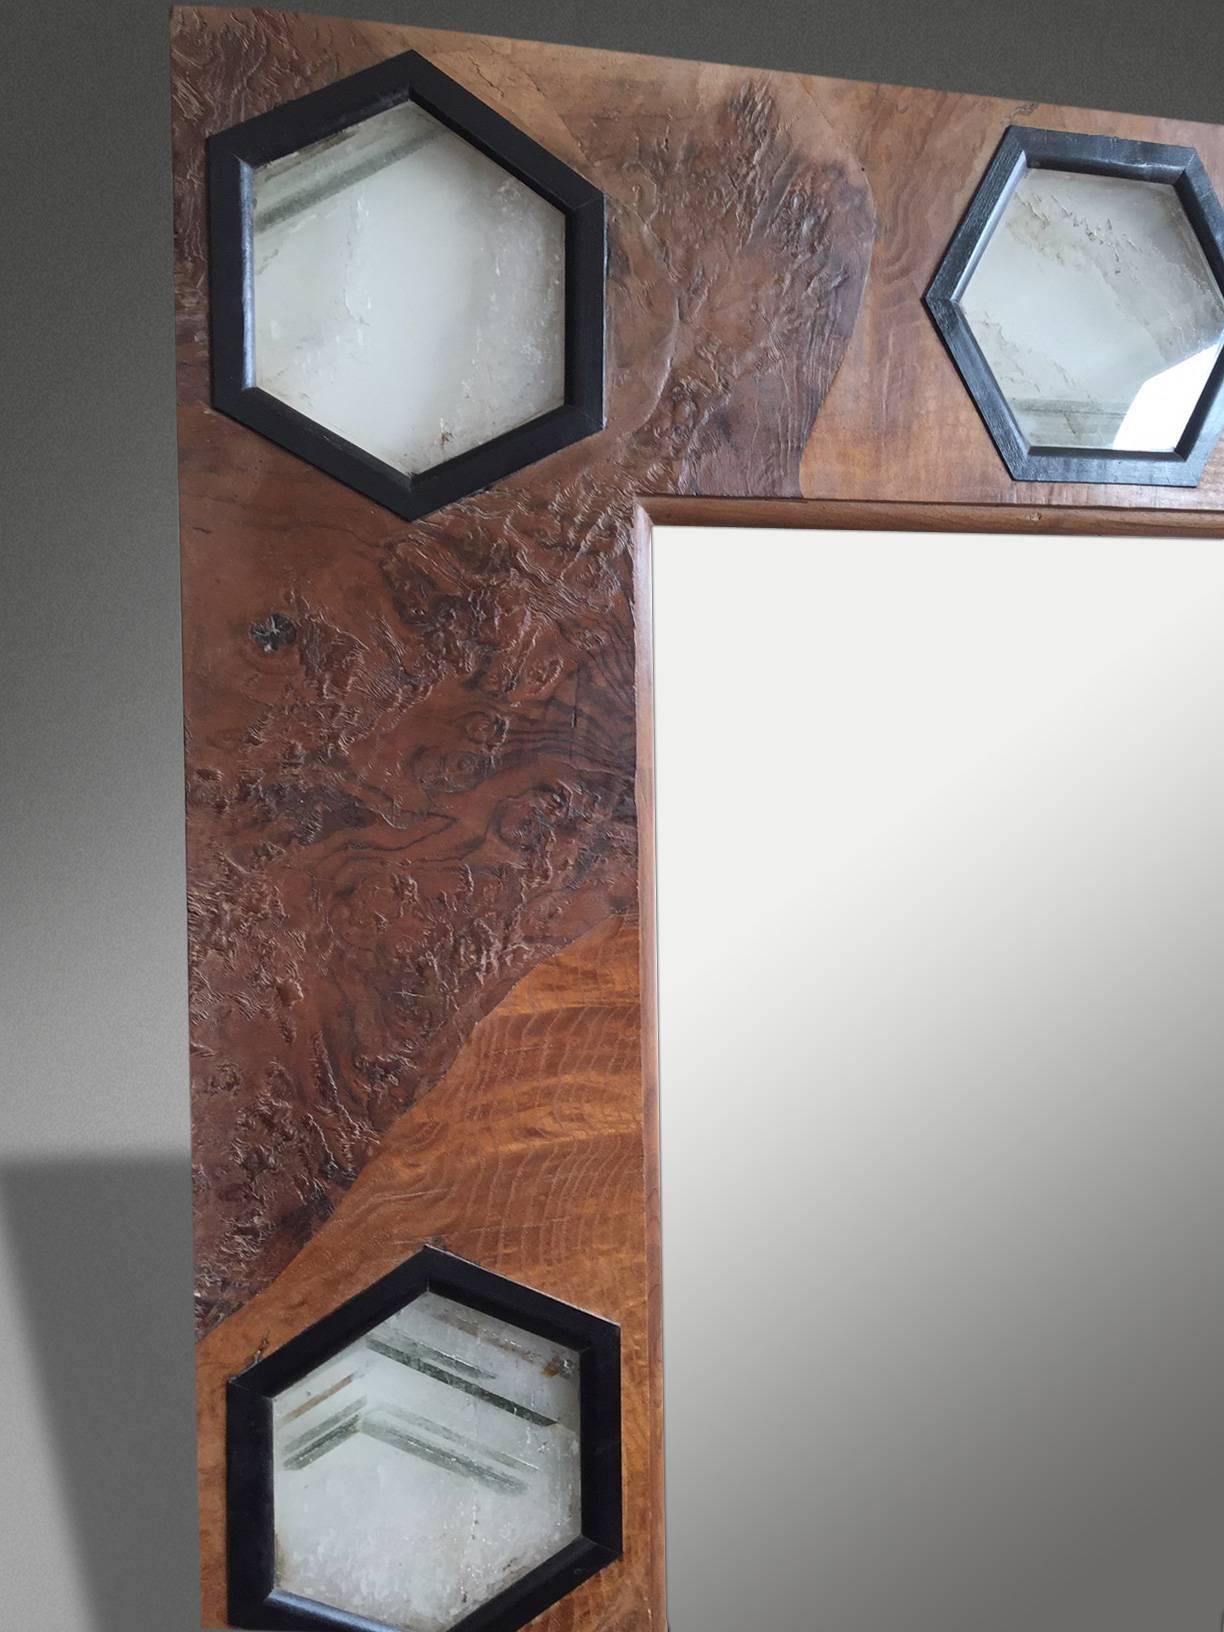 A 1930s style mirror with rare veneers and solid quartz hexagonal plaques in ebonized frames.

The quartz is backlit with varied colored LED lighting.